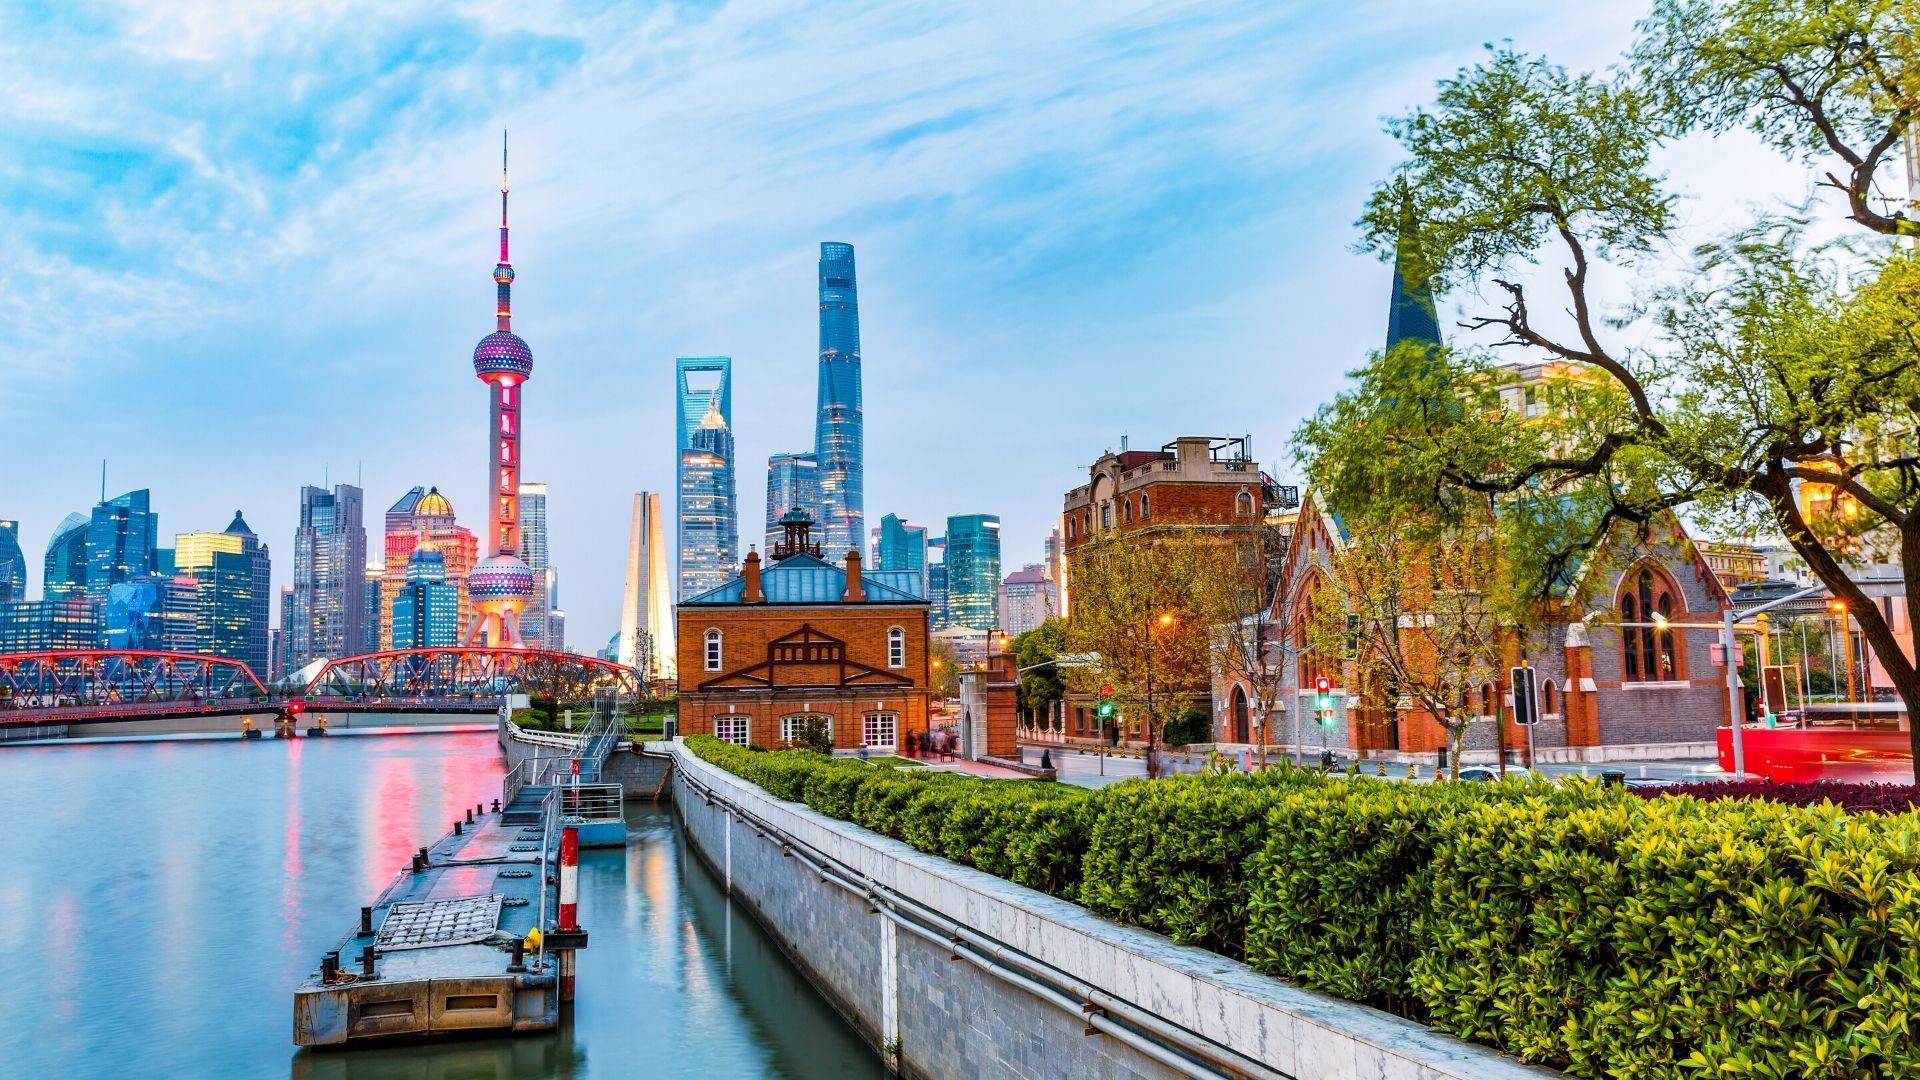 At ASML, customer support engineers get to travel to locations all over the world including Shanghai, China